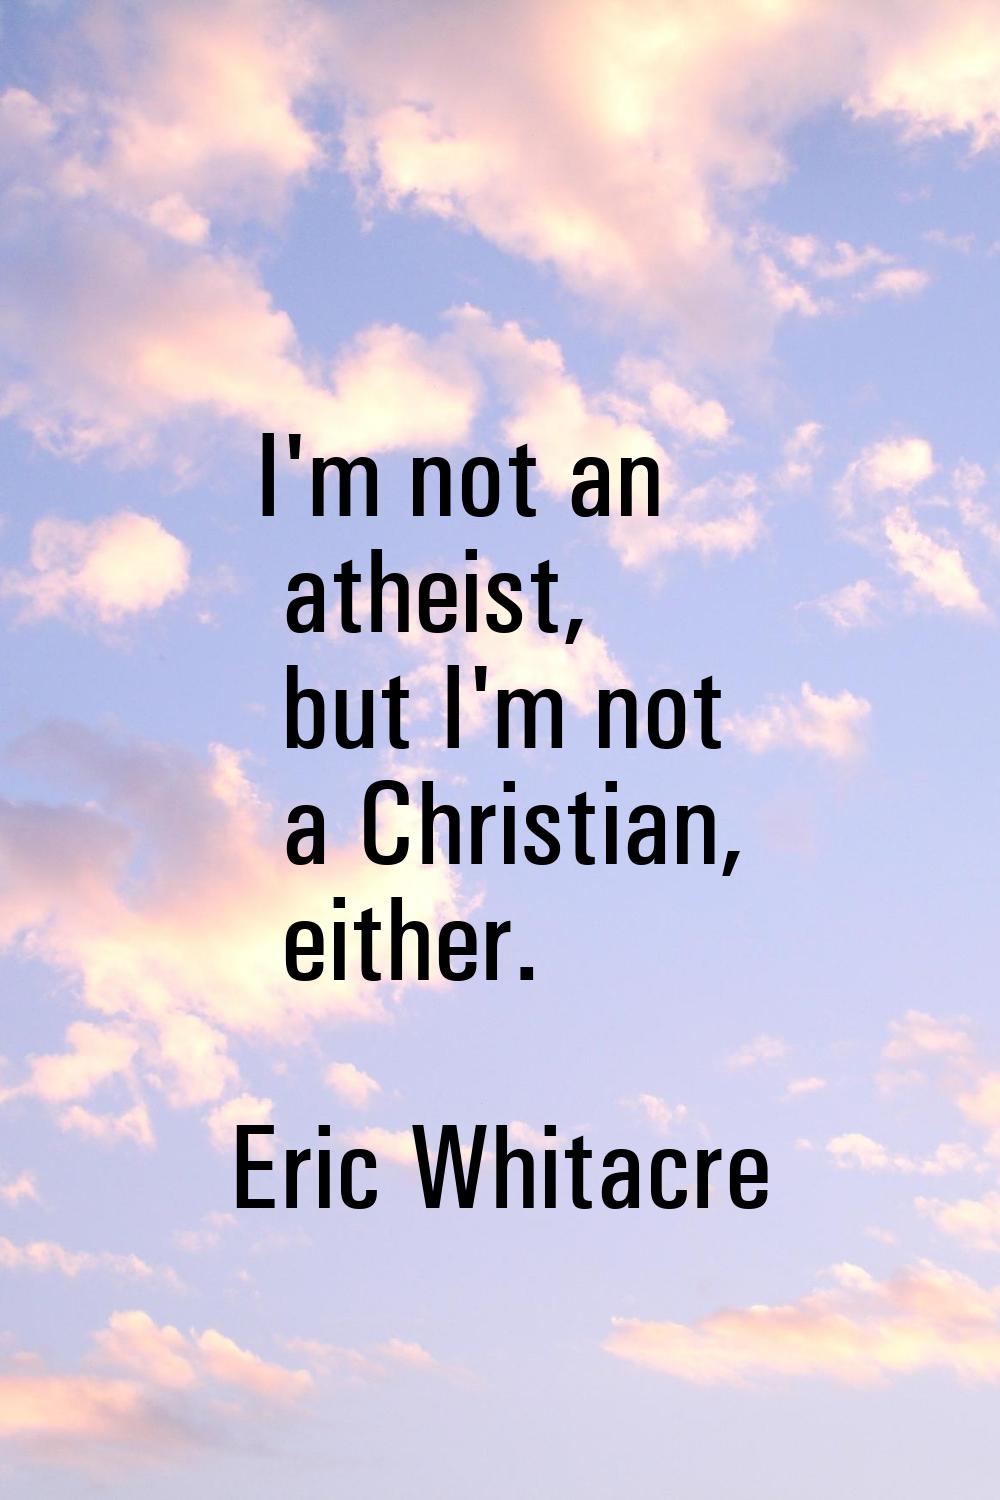 I'm not an atheist, but I'm not a Christian, either.